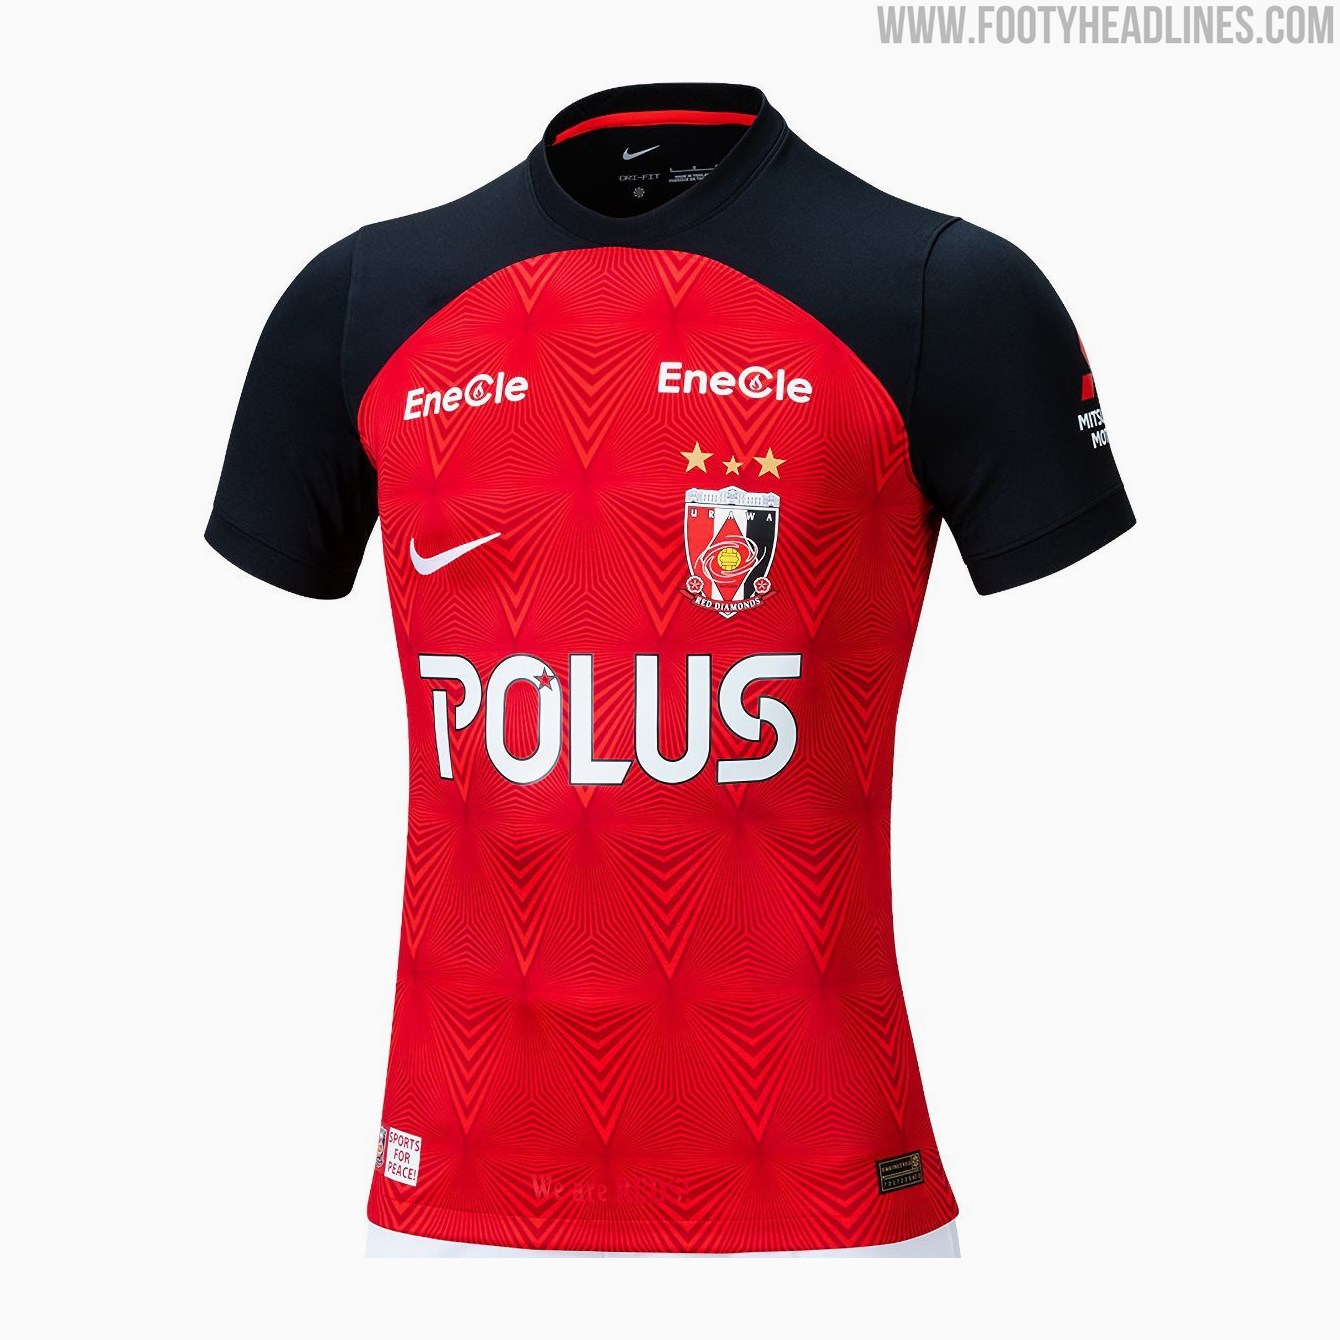 2023 J League Kit Overview - All 18 Clubs - Footy Headlines